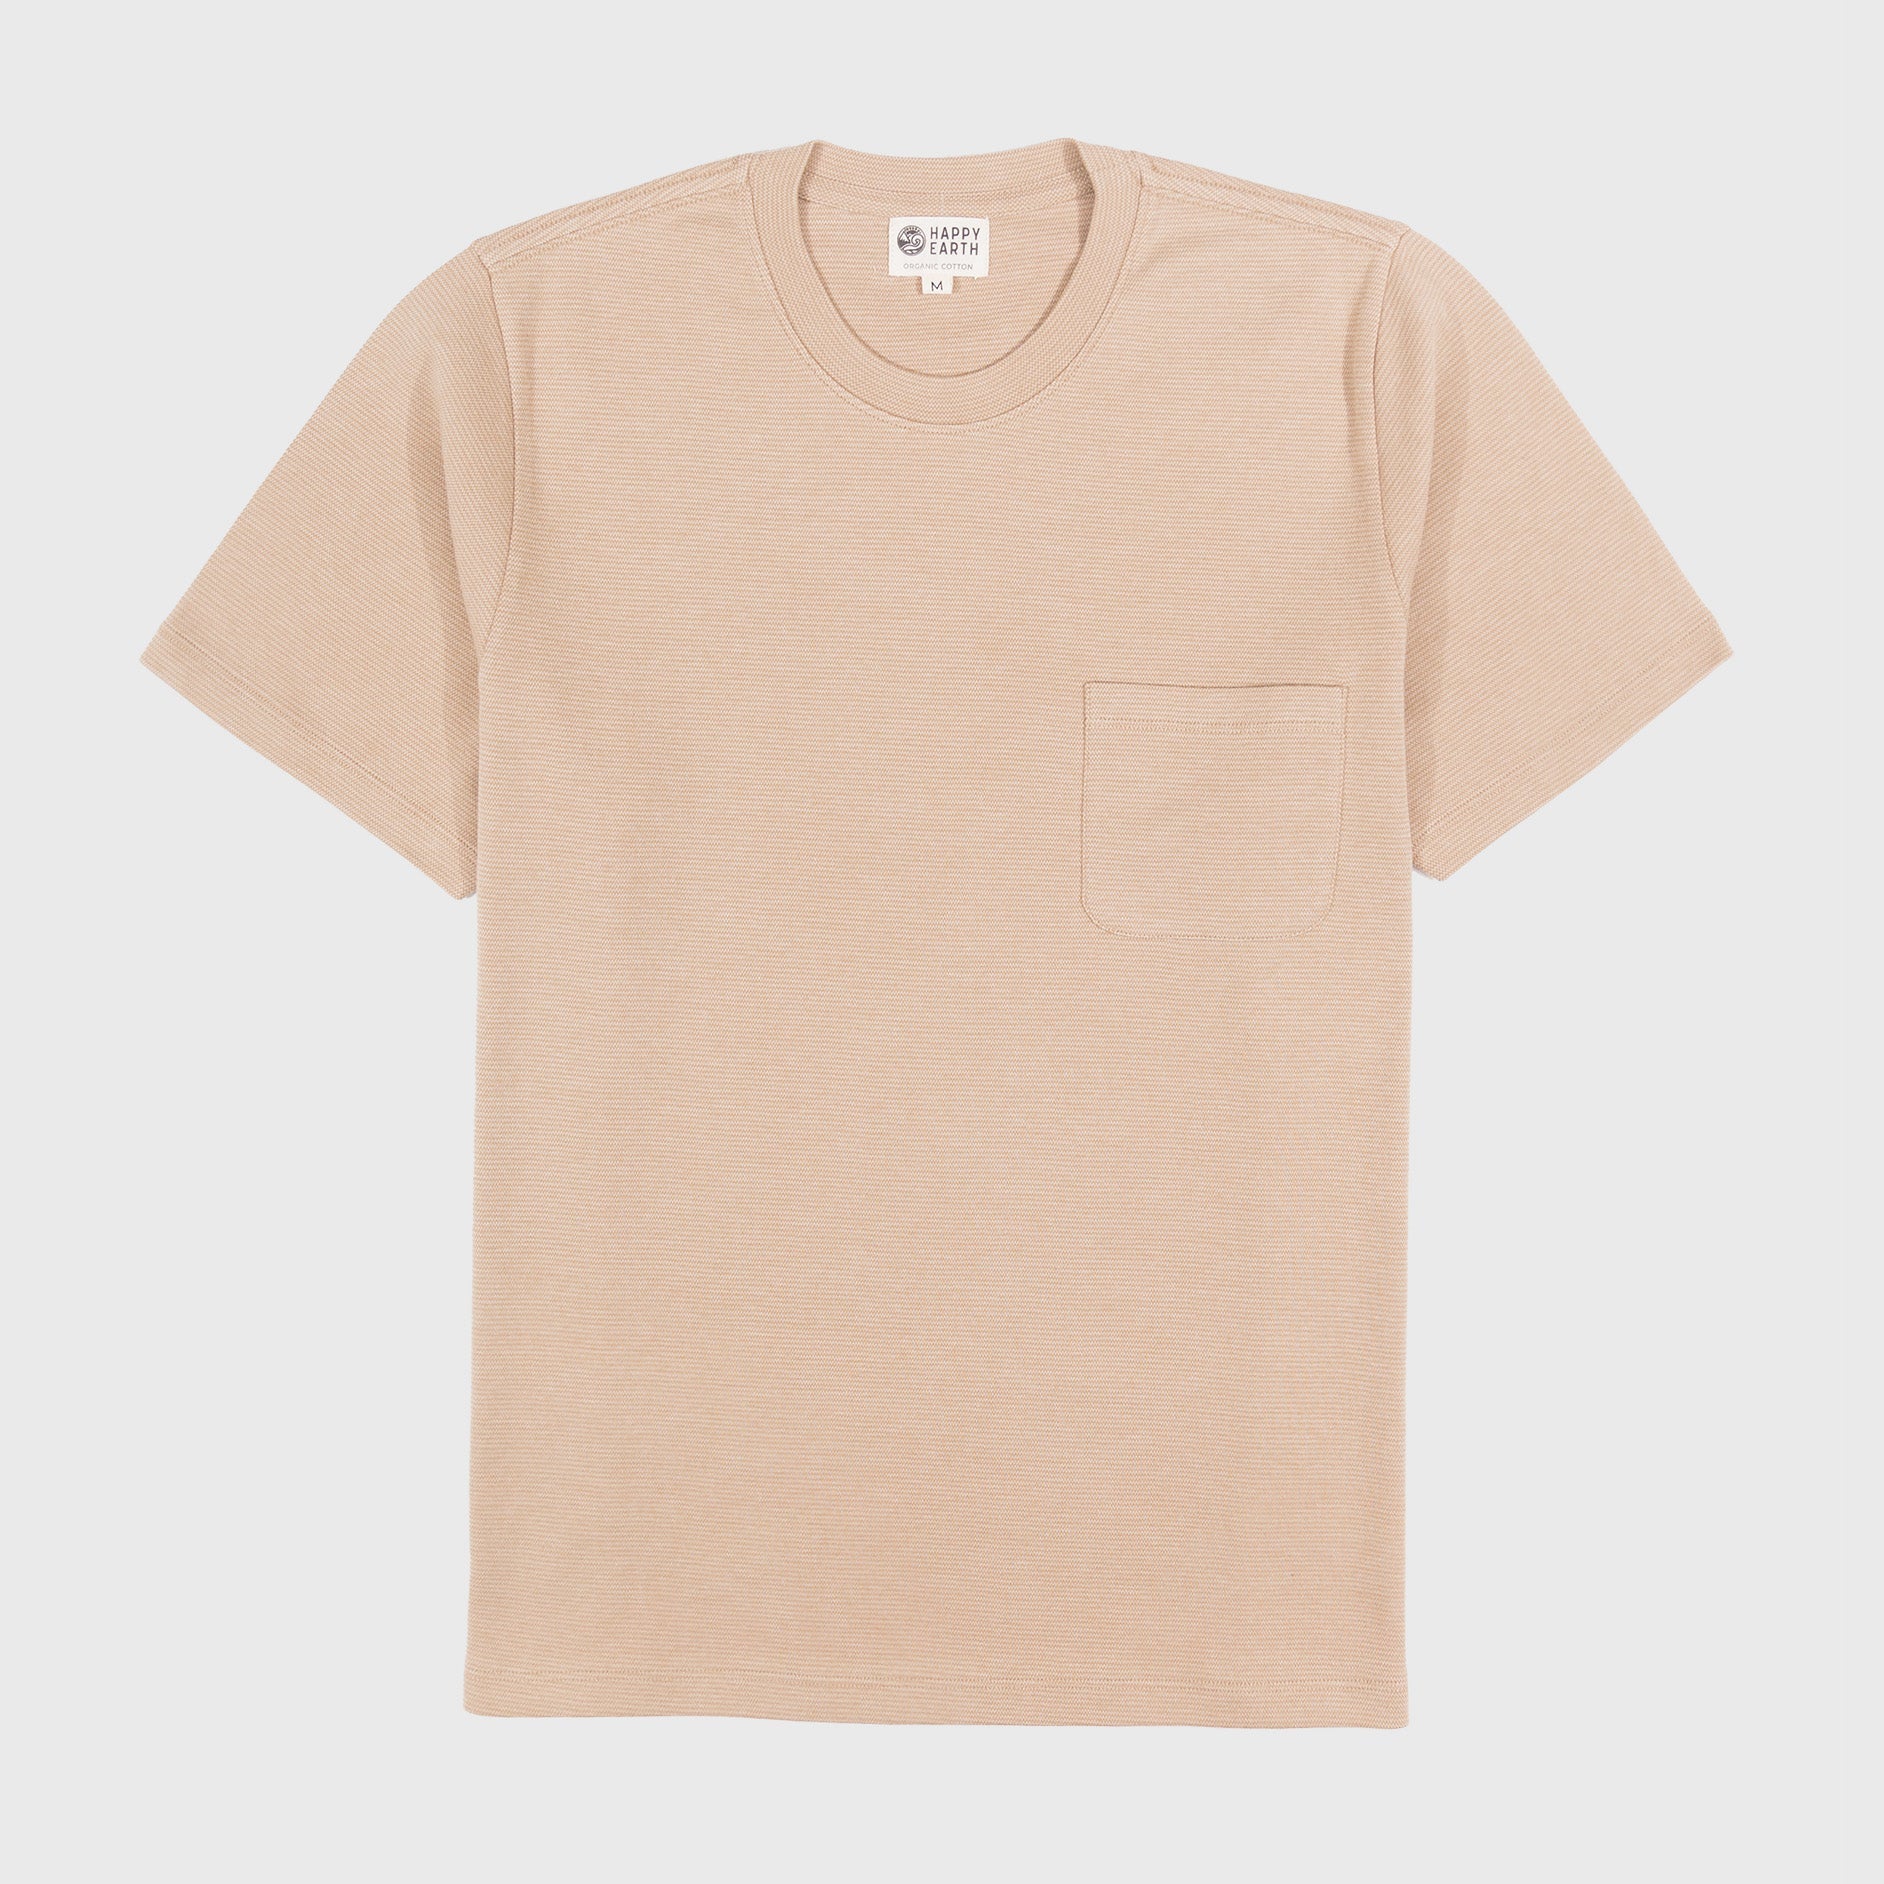 Premium-Weight Tee | Beech Wood by Happy Earth